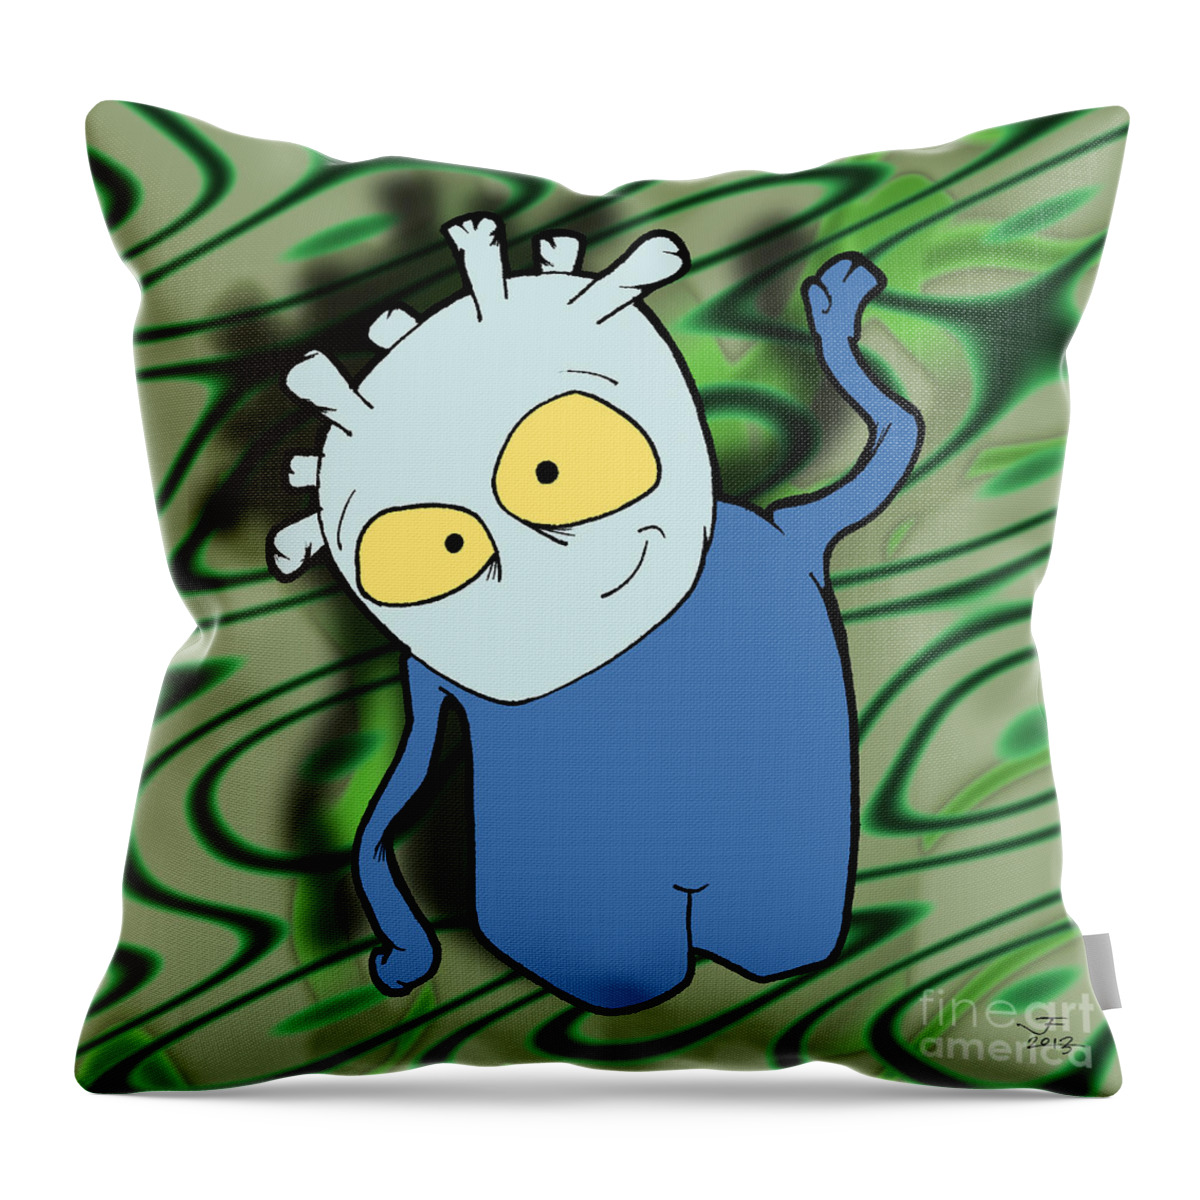 Art Throw Pillow featuring the digital art Chane by Uncle J's Monsters